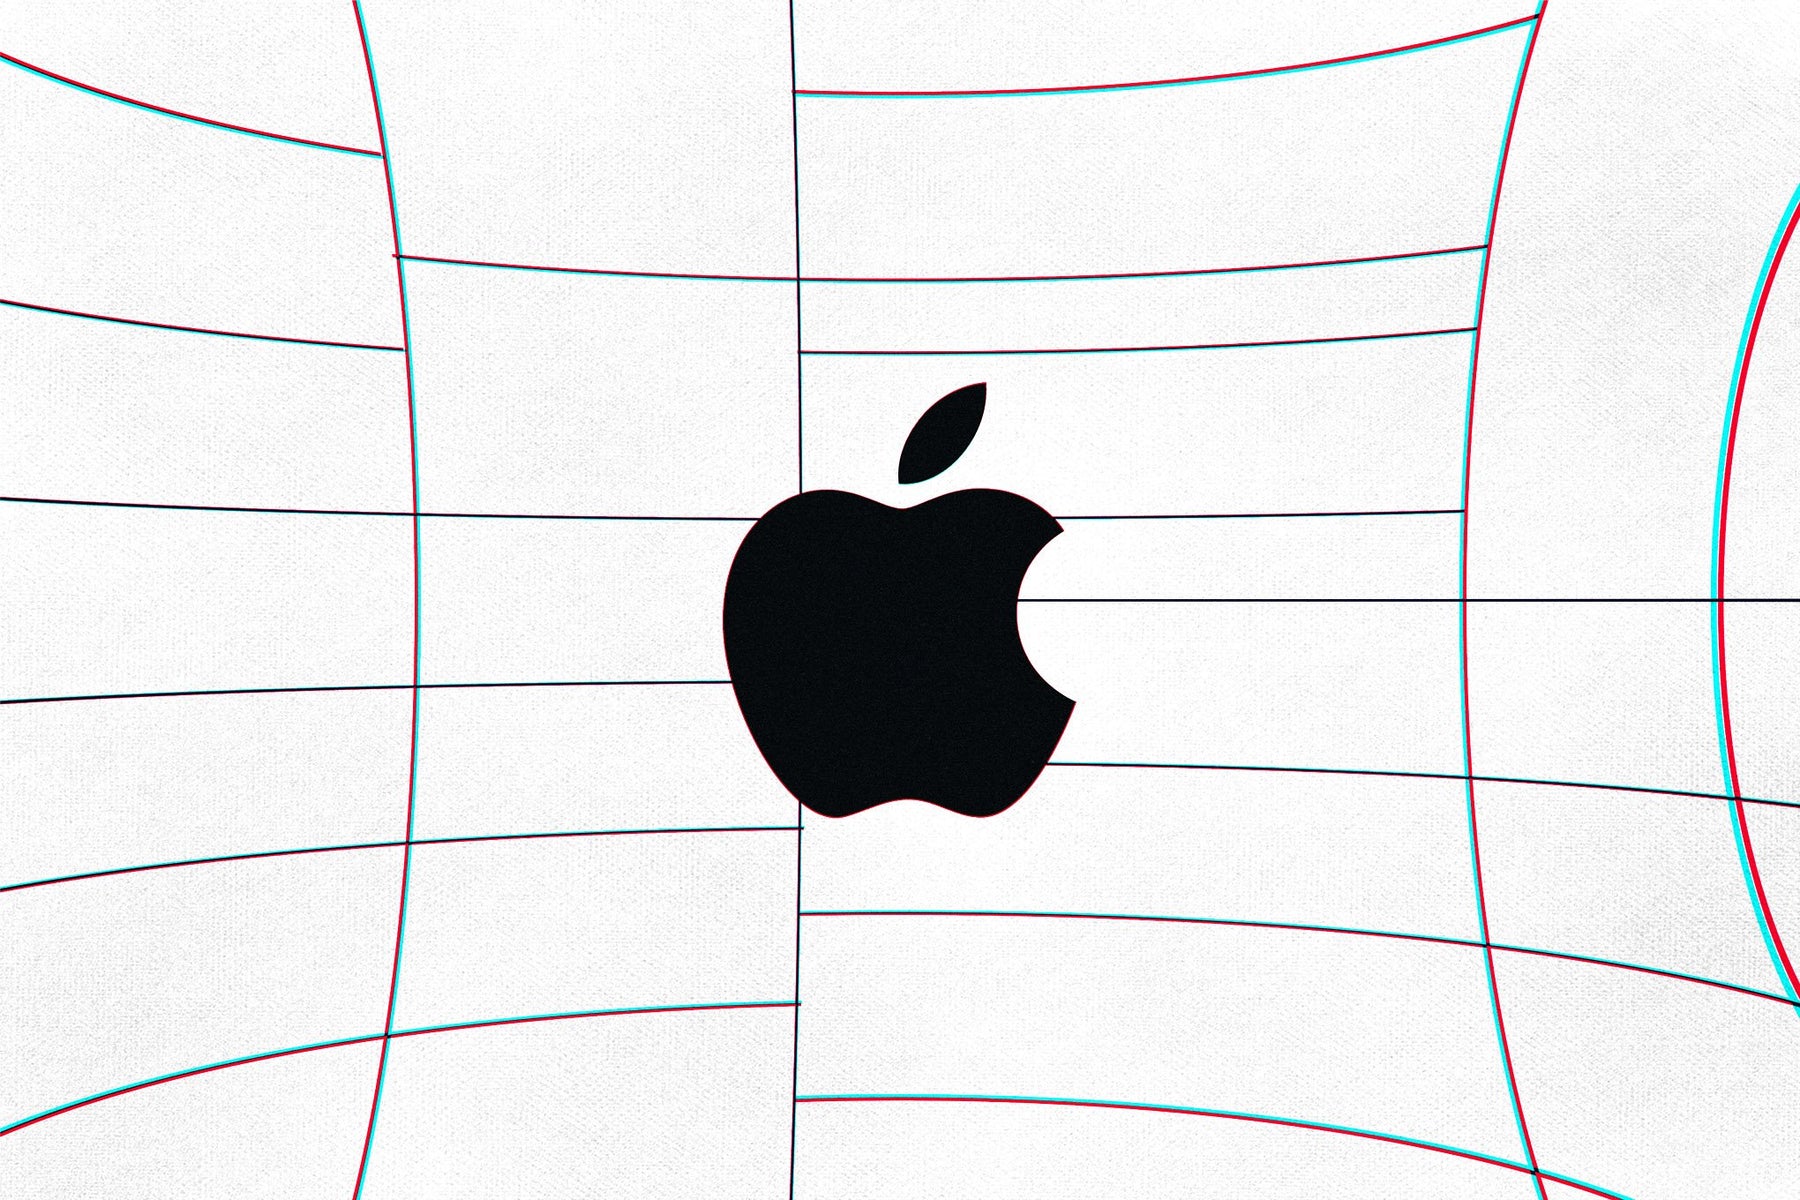 Apple files patent for a smart home system that could configure itself